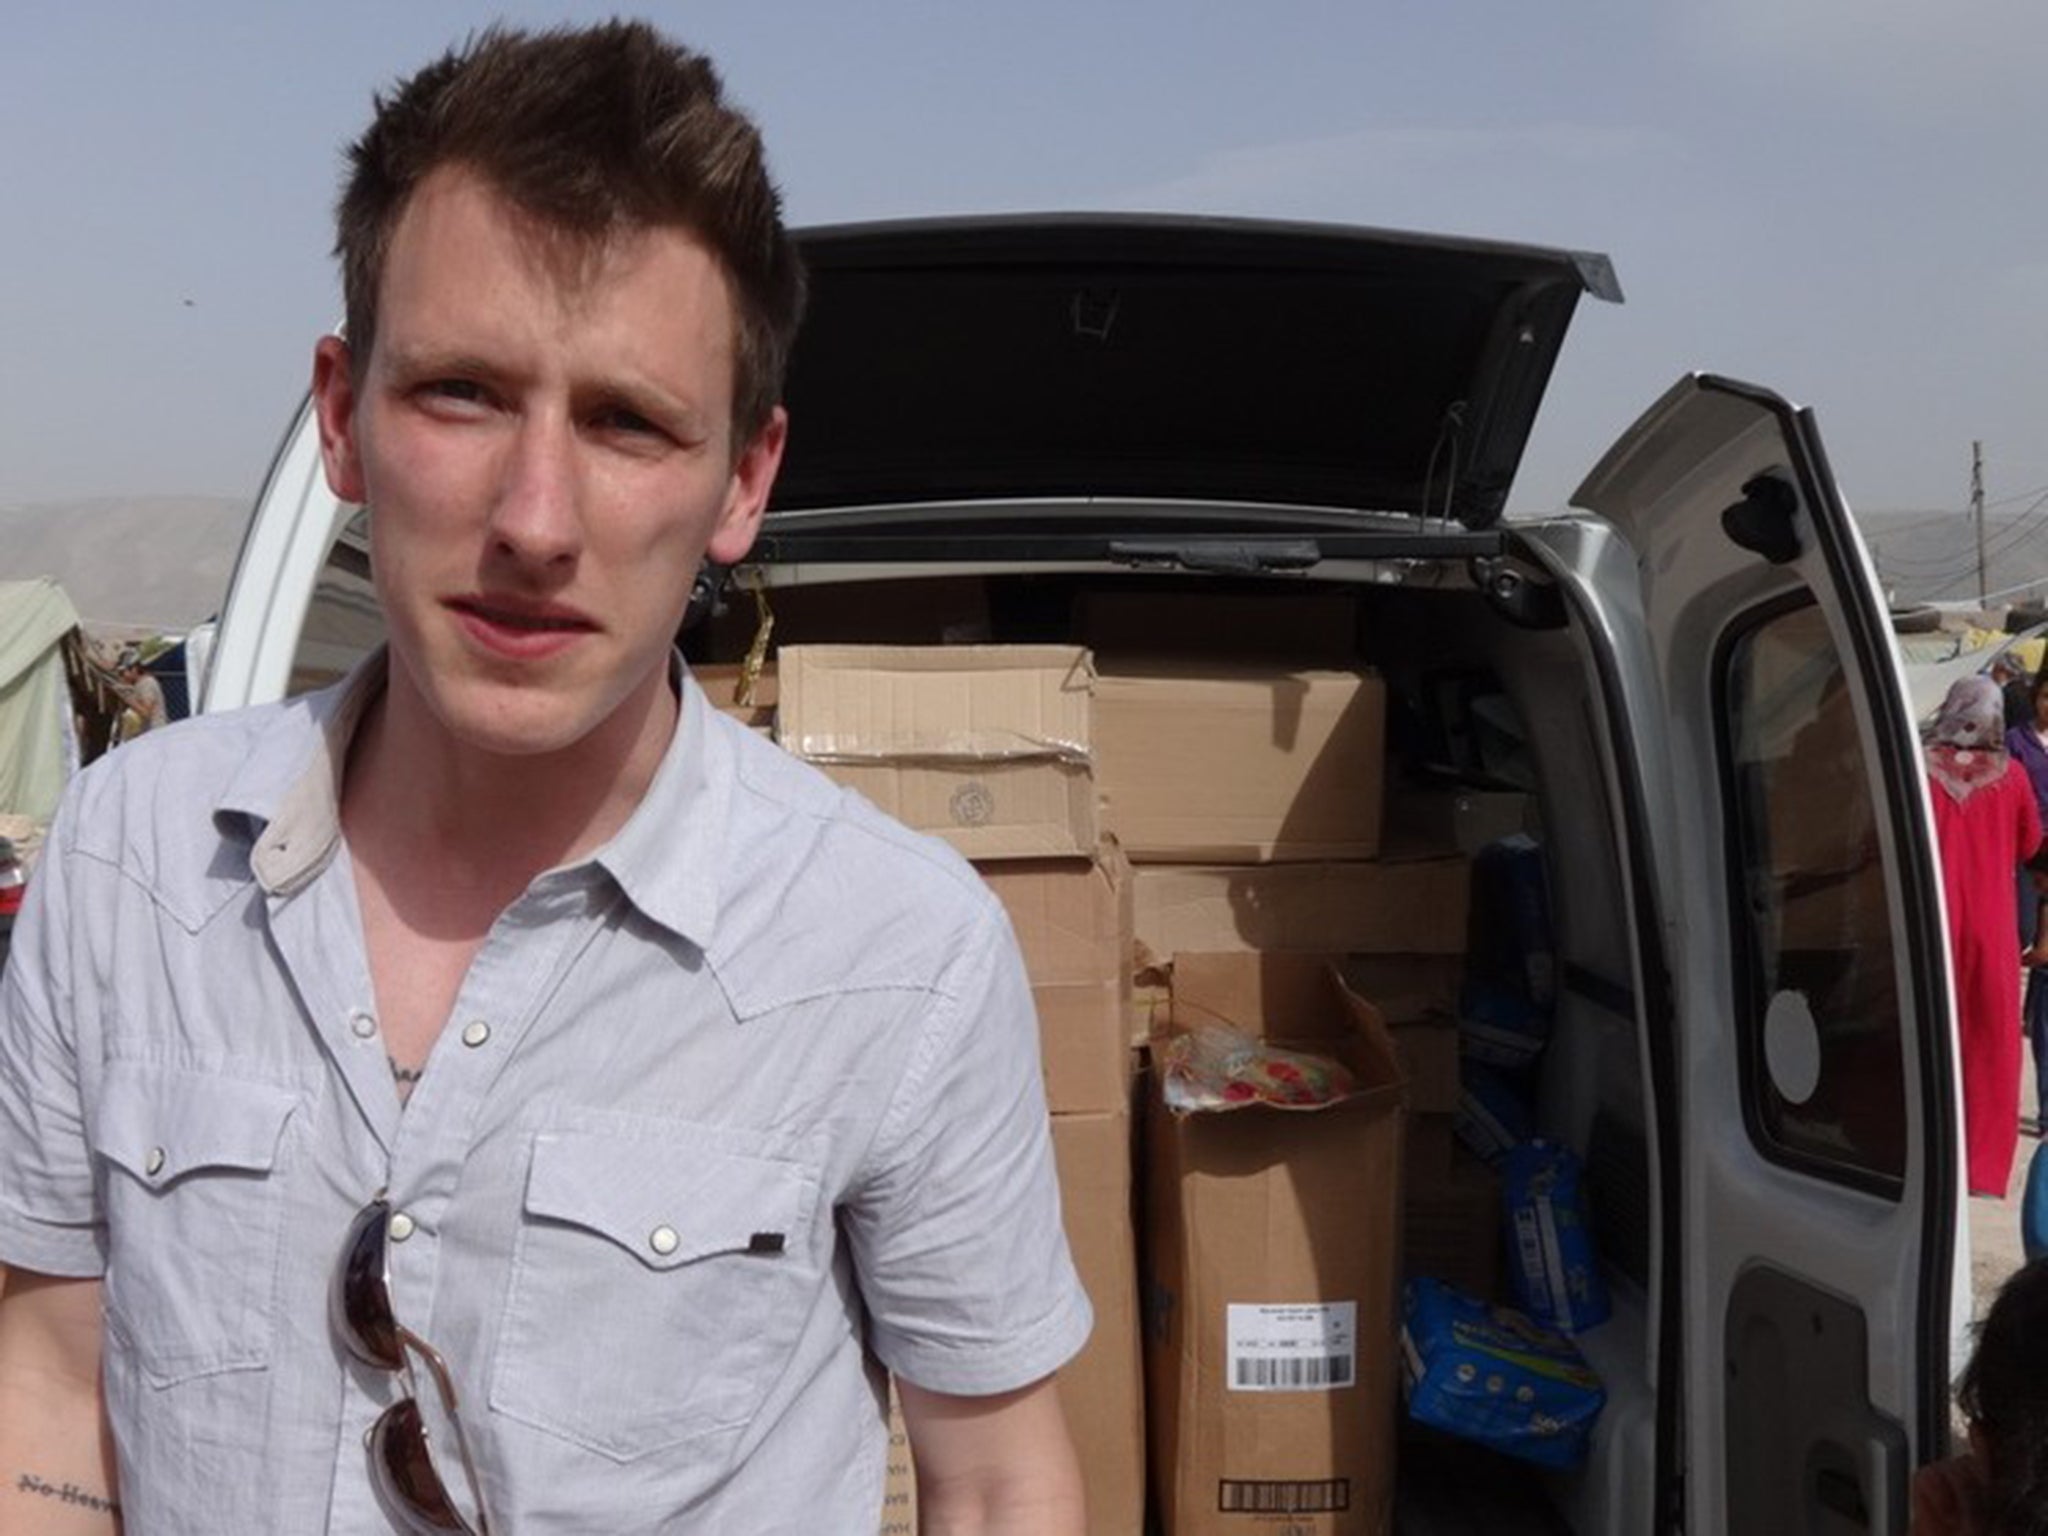 Abdul-Rahman Kassig, 26, was kidnapped last year while carrying out aid work in eastern Syria